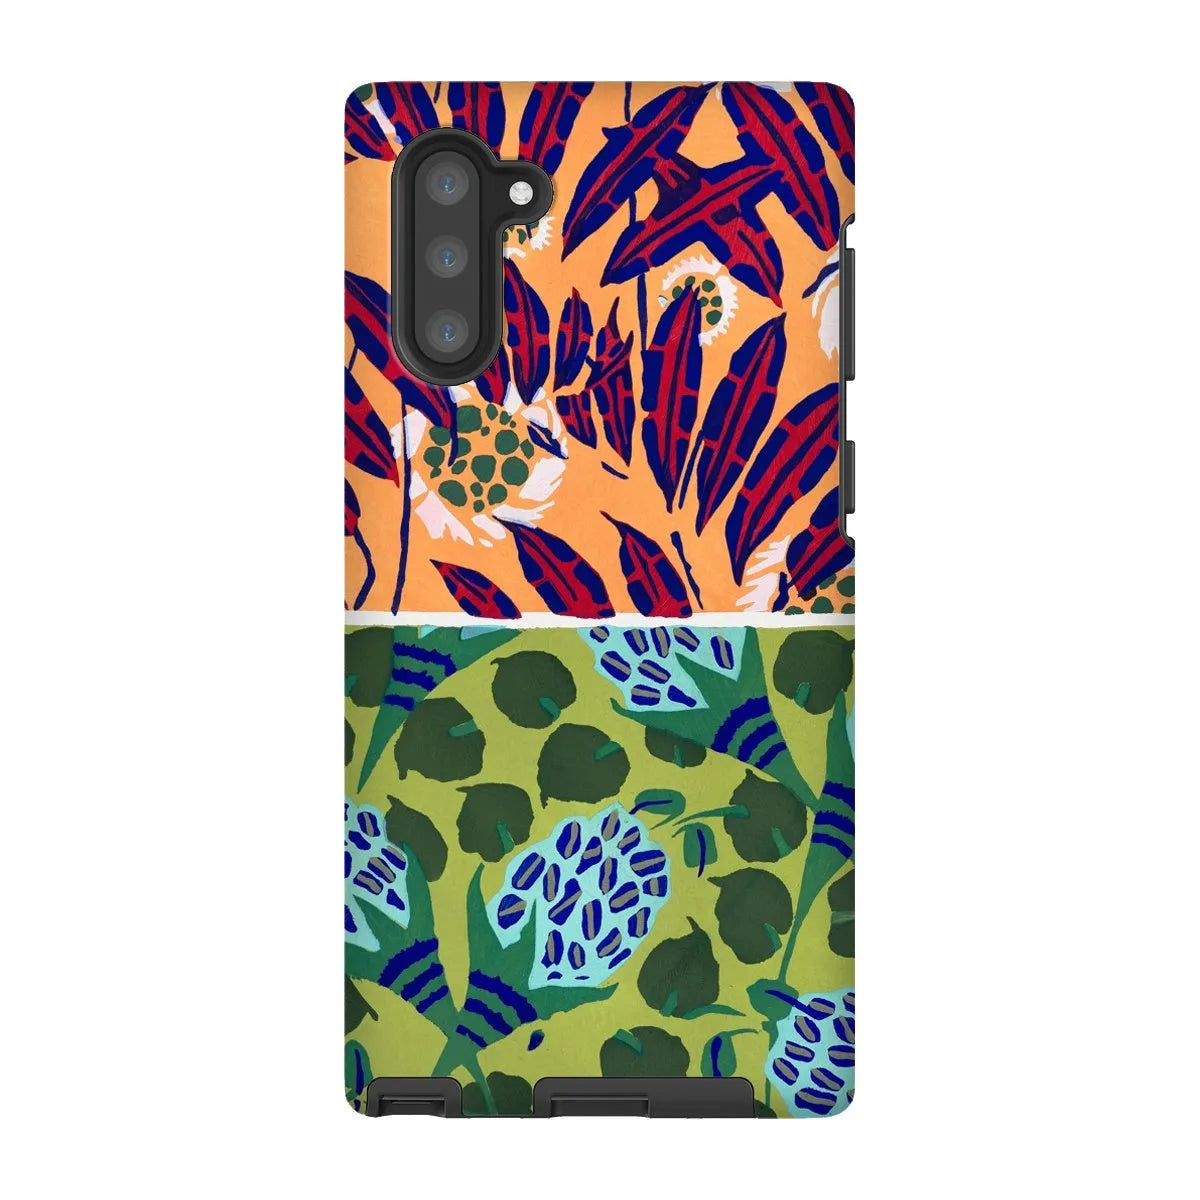 Fabric & Rugs Too - Pochoir Pattern Phone Case - E. A. Séguy - Samsung Galaxy Note 10 / Matte - Mobile Phone Cases